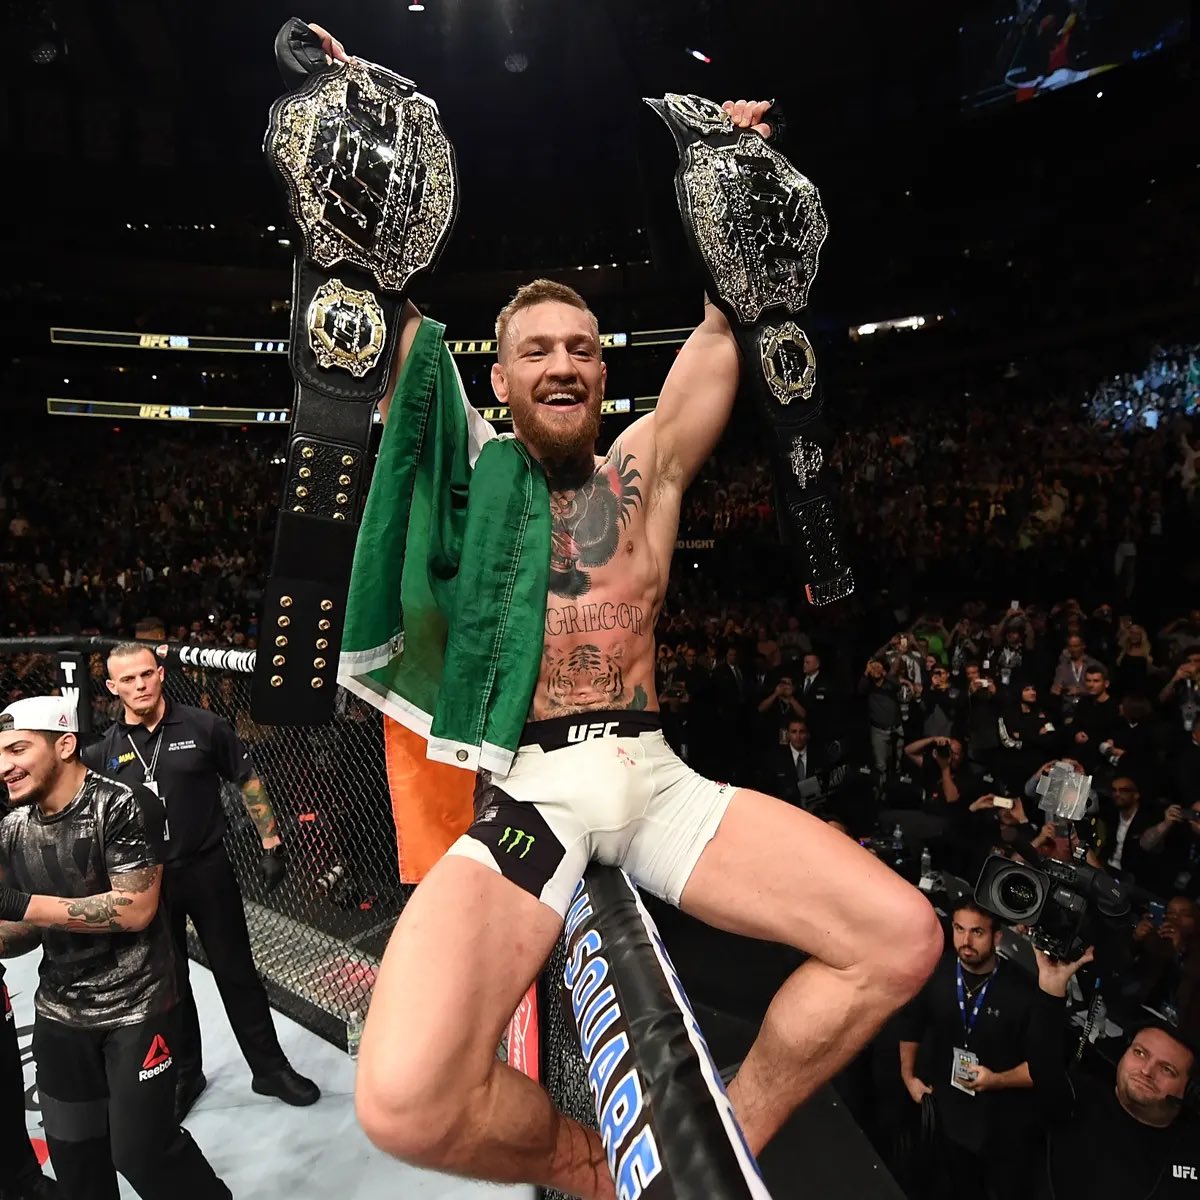 Regardless of what his future holds, Conor McGregor’s legacy is secure. He created history and elevated the entire sport. Nothing can erase his contributions.